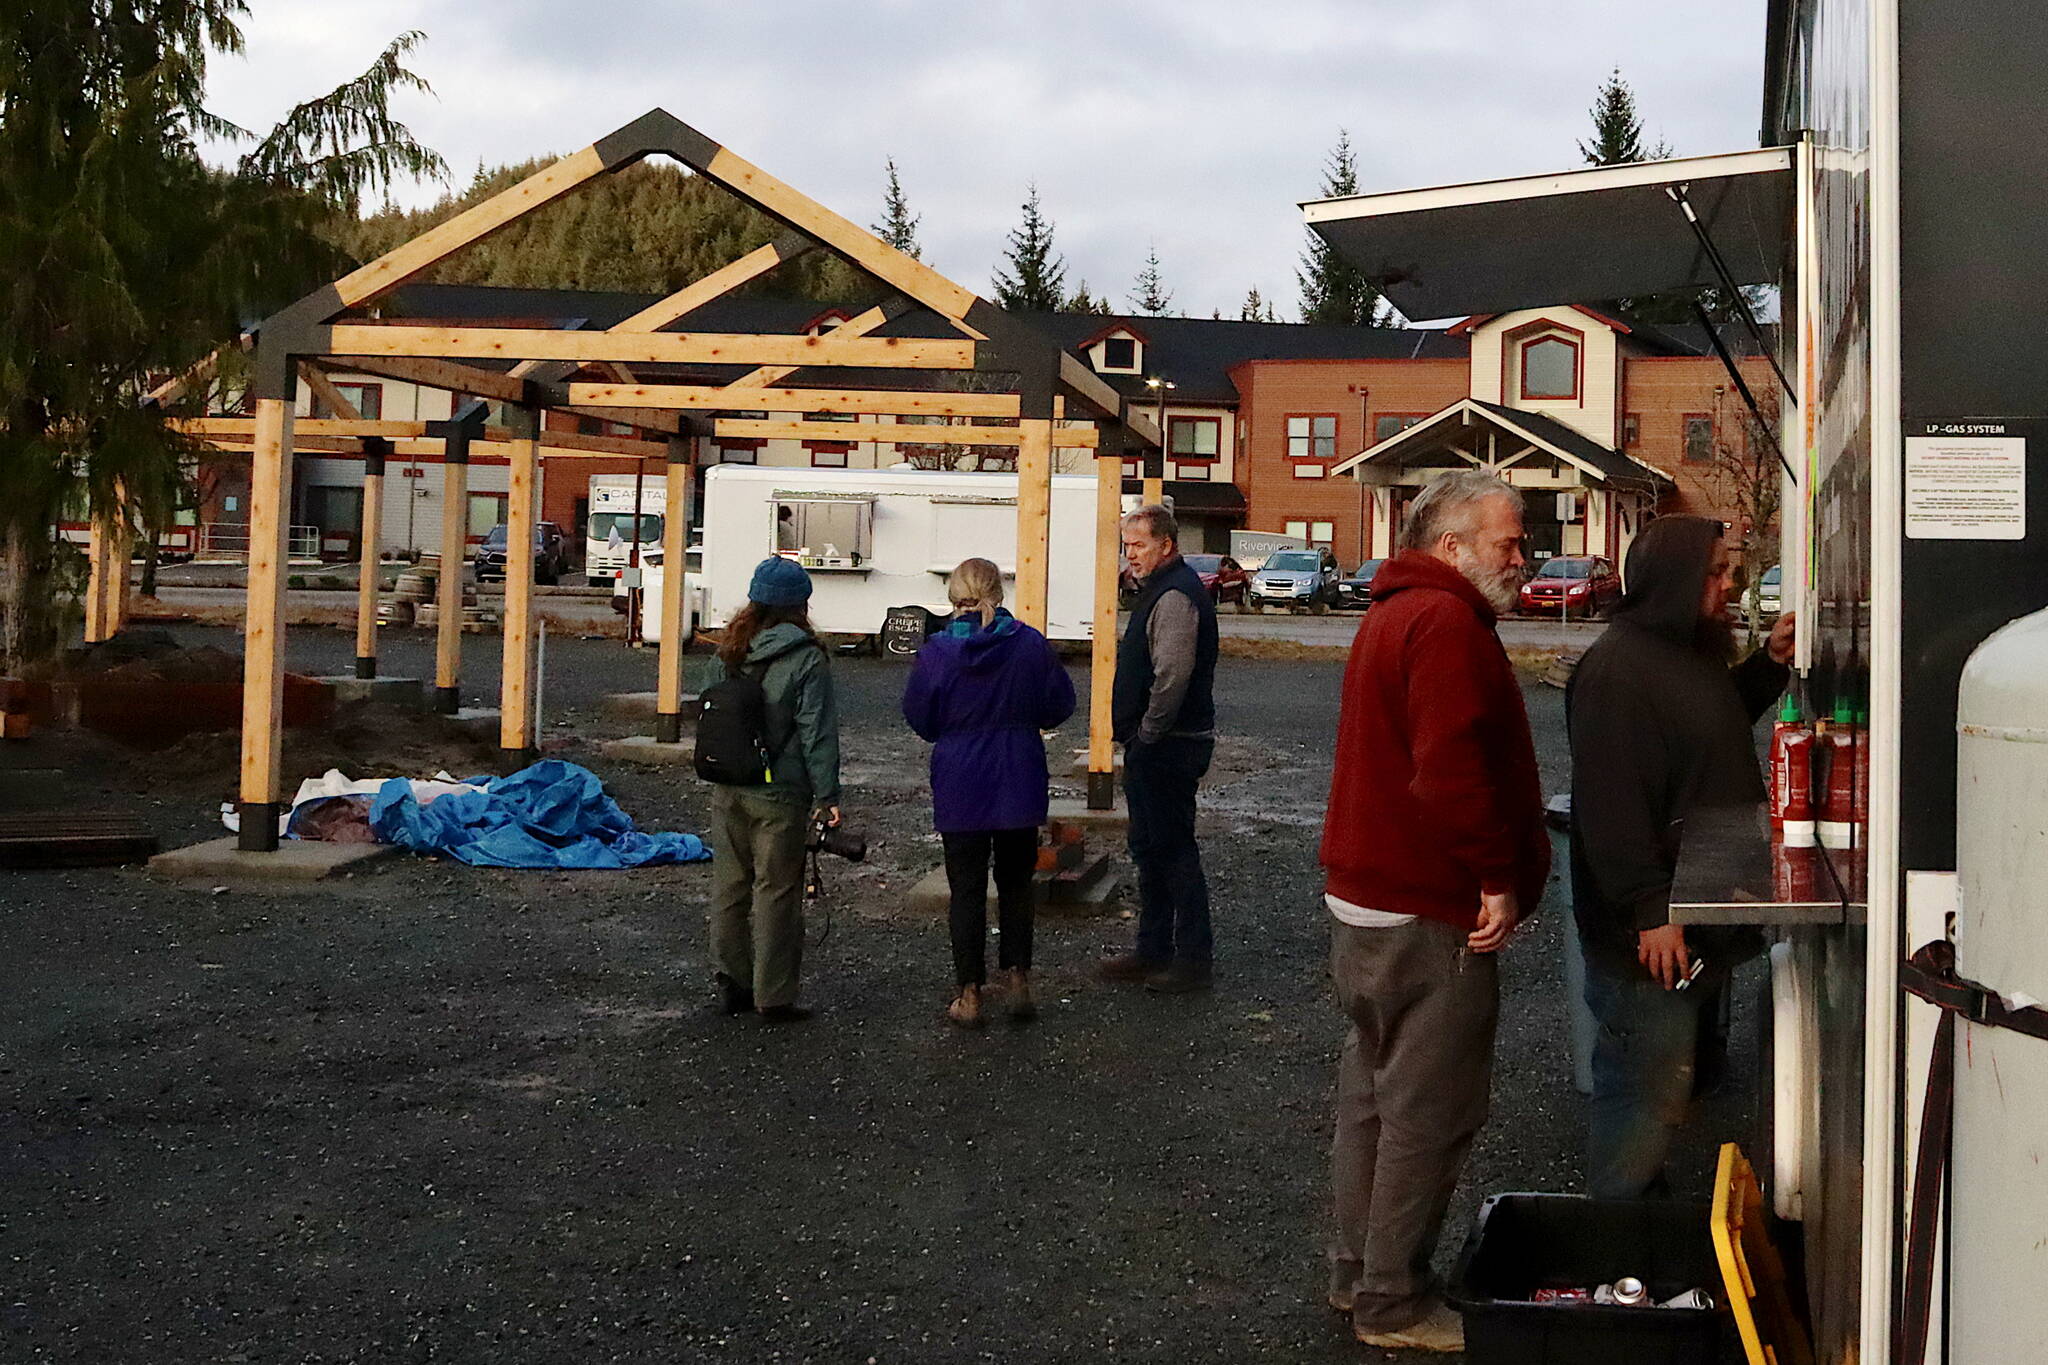 Ron Ekis (wearing red) and Dakota Brown order from Devils Hideaway at the new Vintage Food Truck Park as Marty McKeown, owner of the property, shows seating facilities still under construction to other local media members on Wednesday. (Mark Sabbatini / Juneau Empire)